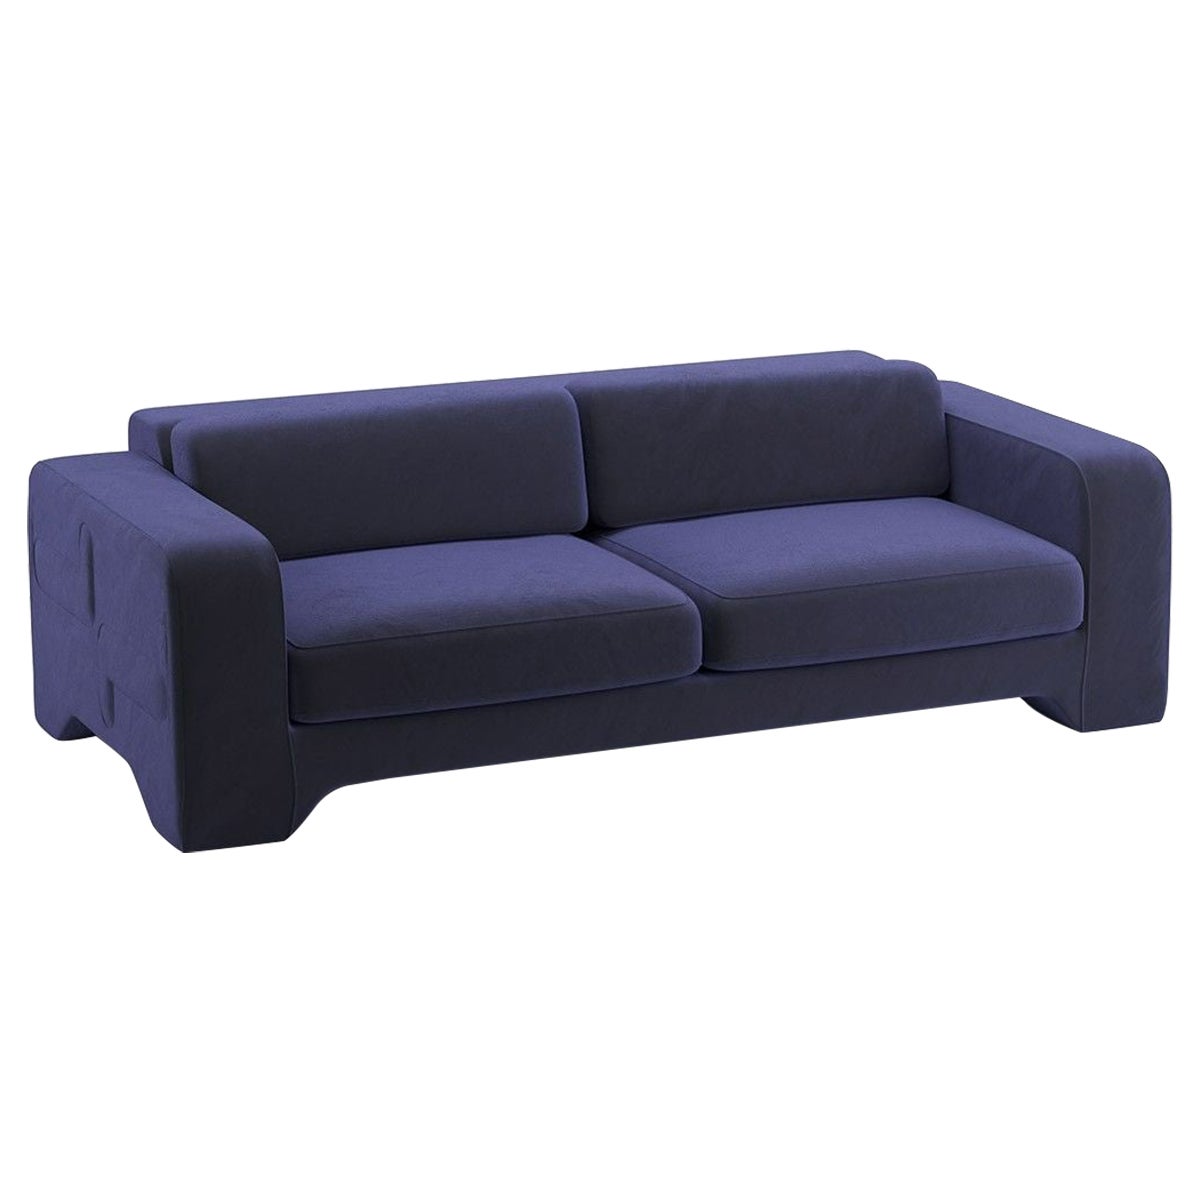 Popus Editions Giovanna 3 Seater Sofa in Marine Navy Como Velvet Upholstery For Sale